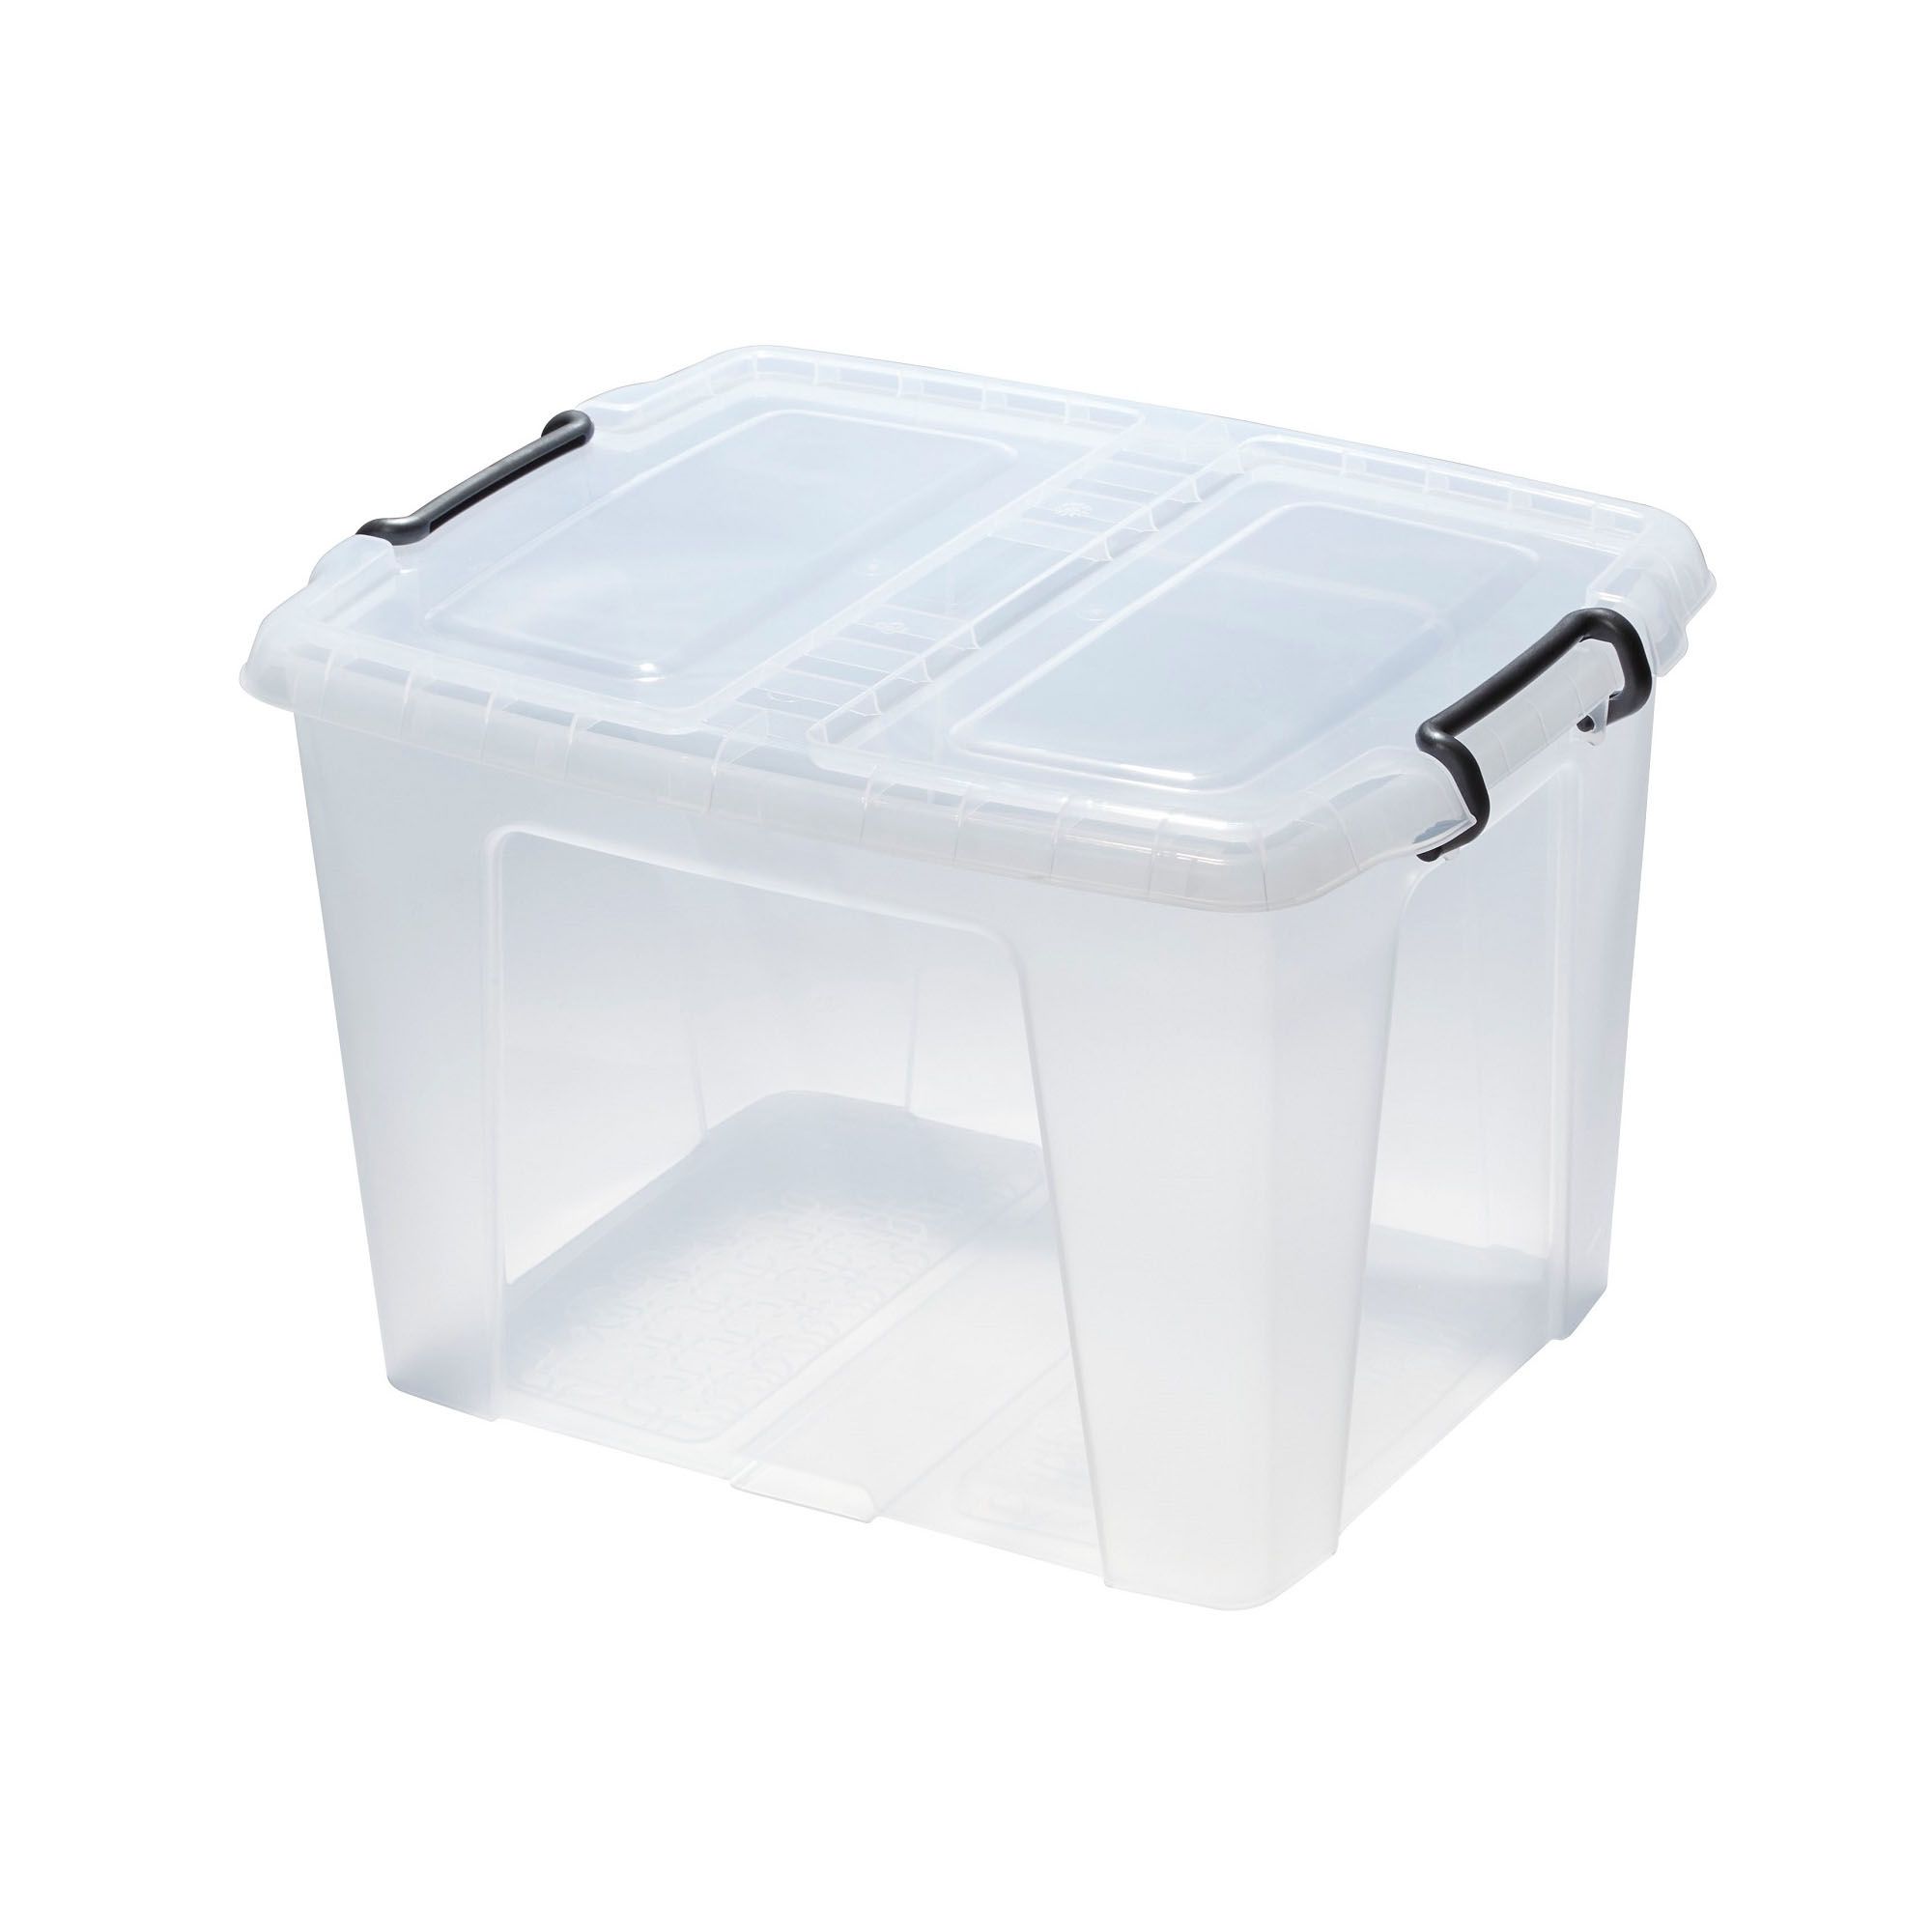 1 Pcs Extra Large Clear Plastic Storage Box With Lid Wheels